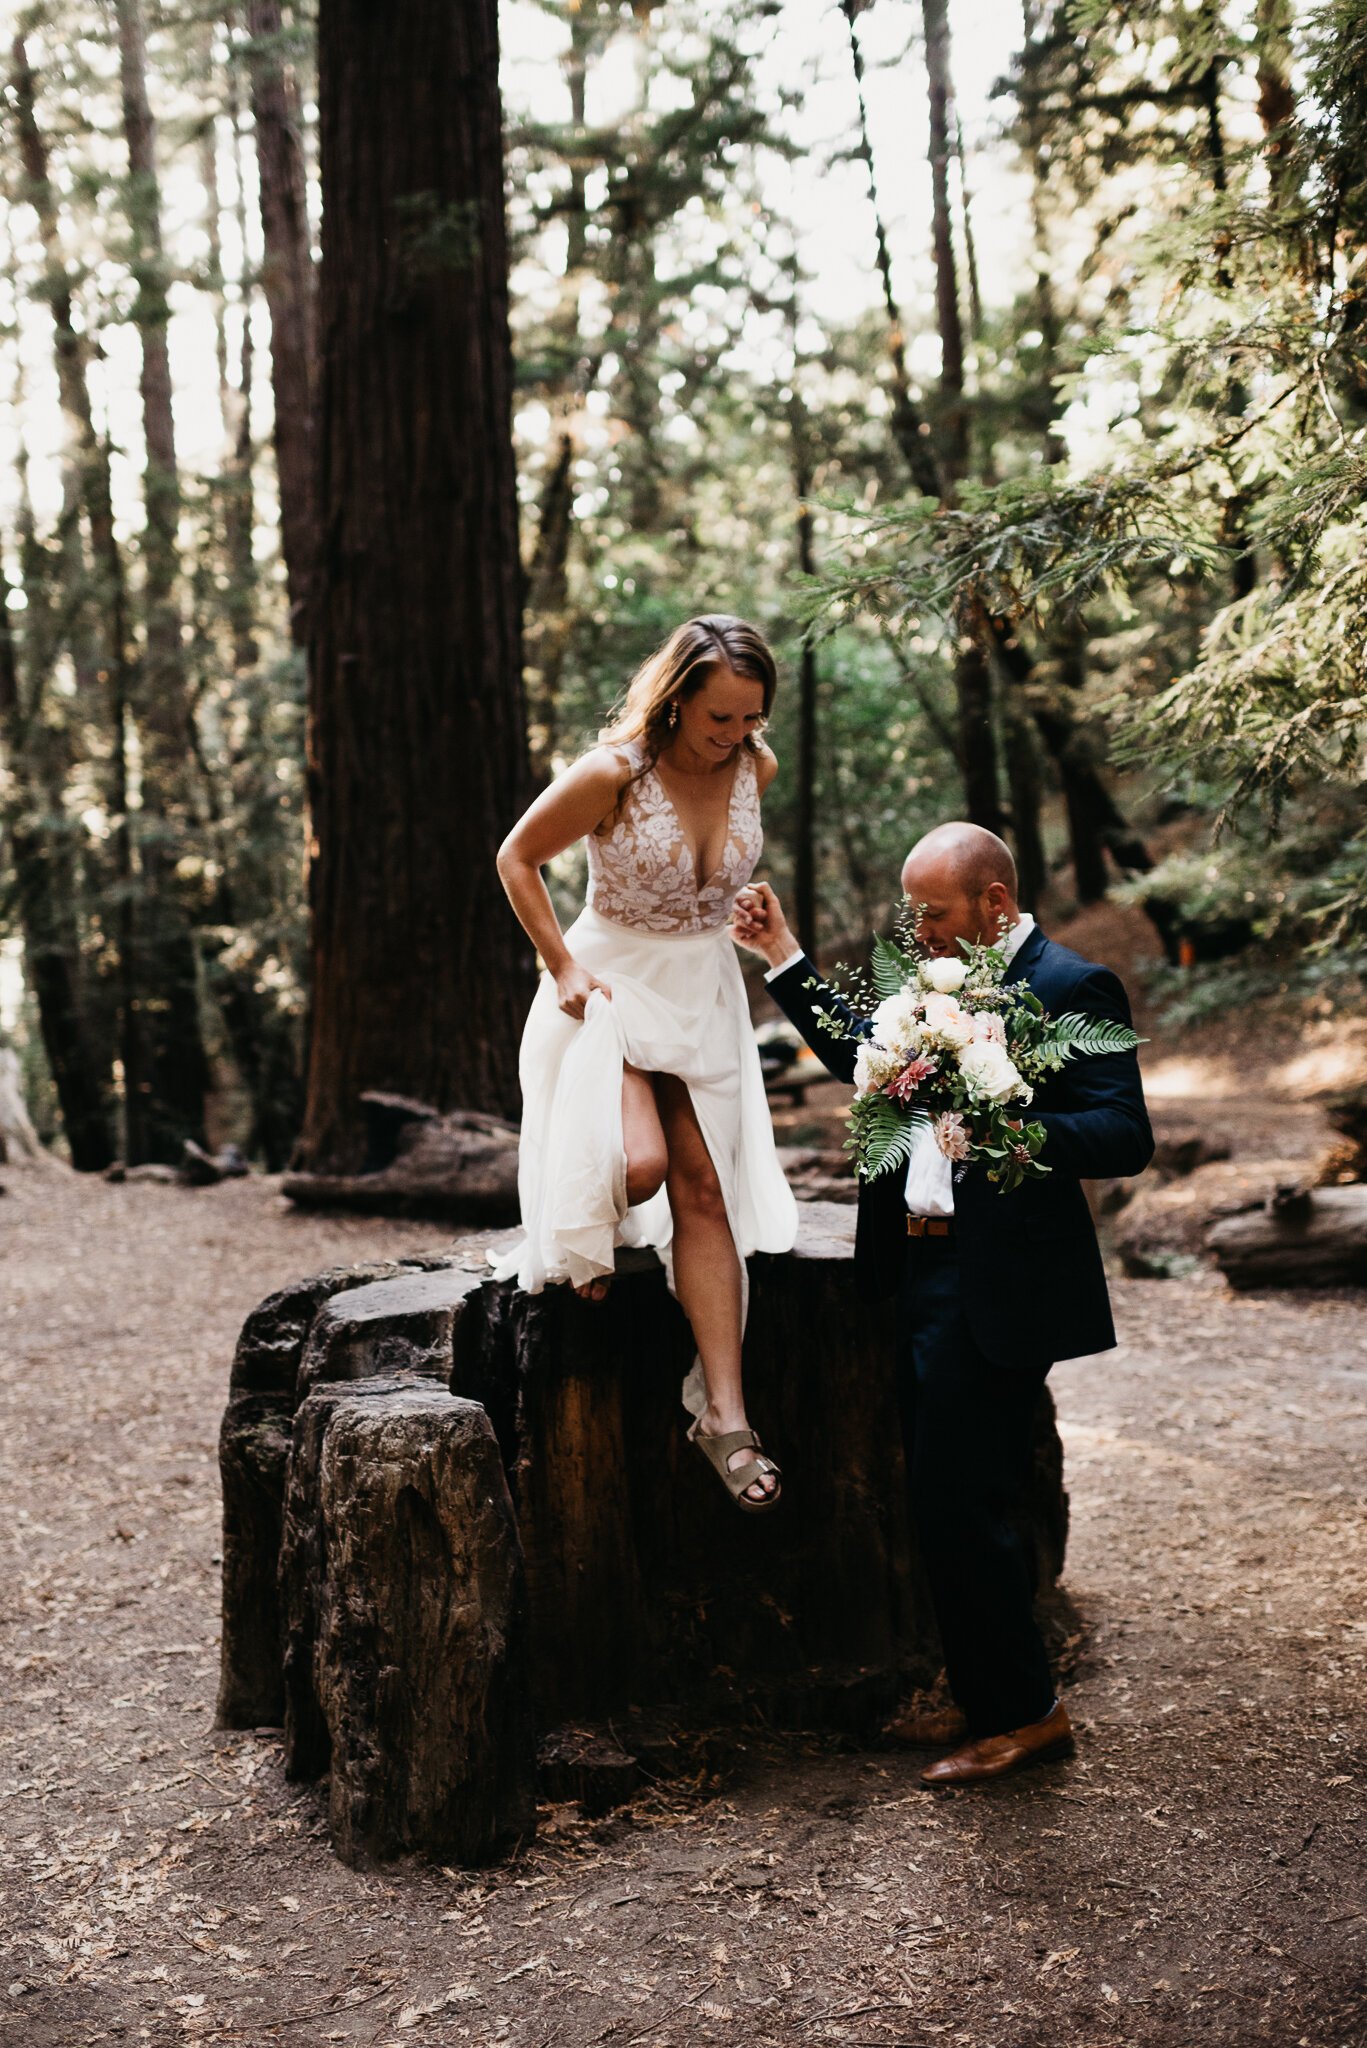 Groom helping bride down from tree stump in Forest Big Sur